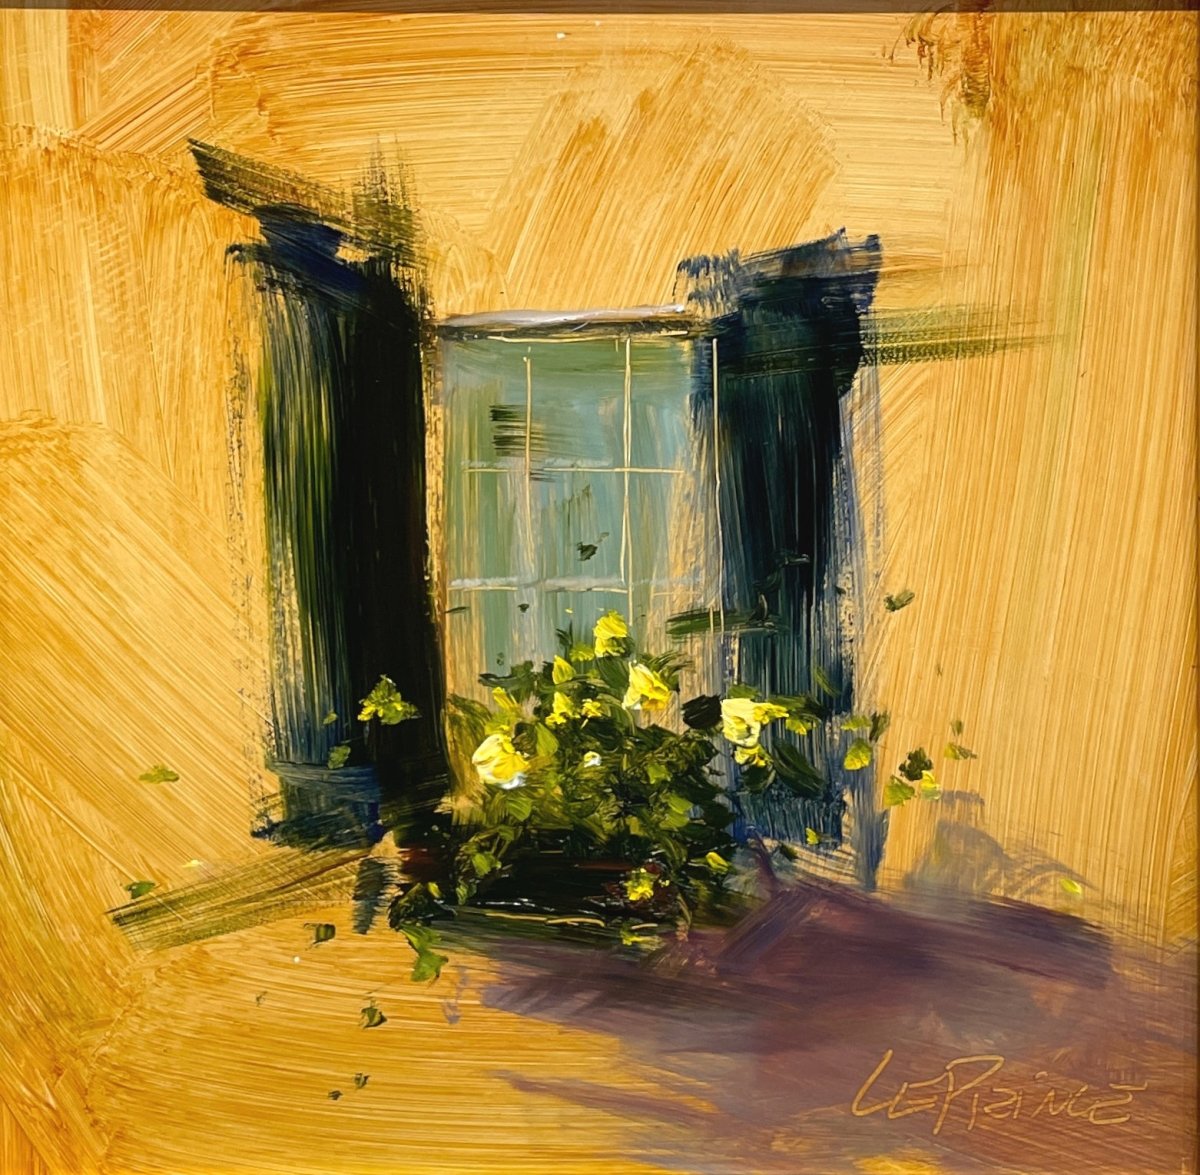 Window Box Study III by Kevin LePrince at LePrince Galleries